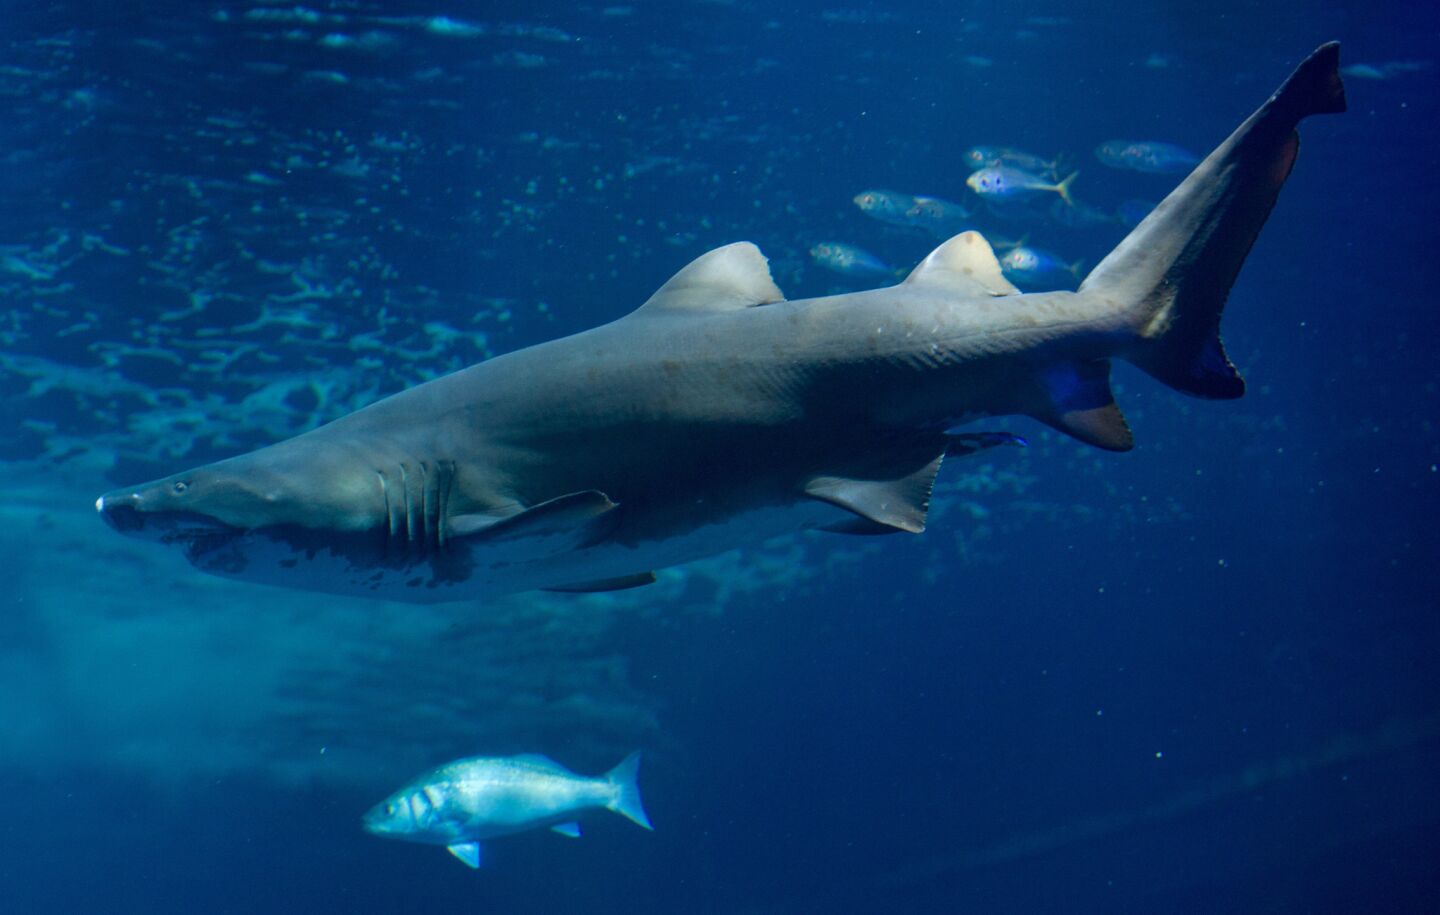 Sand tiger sharks live close to the shorelines and sandy beaches of North America and in the waters of Japan, Australia, and South Africa. They are one of the "big three" of deadly shark species because of the frequency of attacks and because they are a large species whose teeth can cause serious injury.